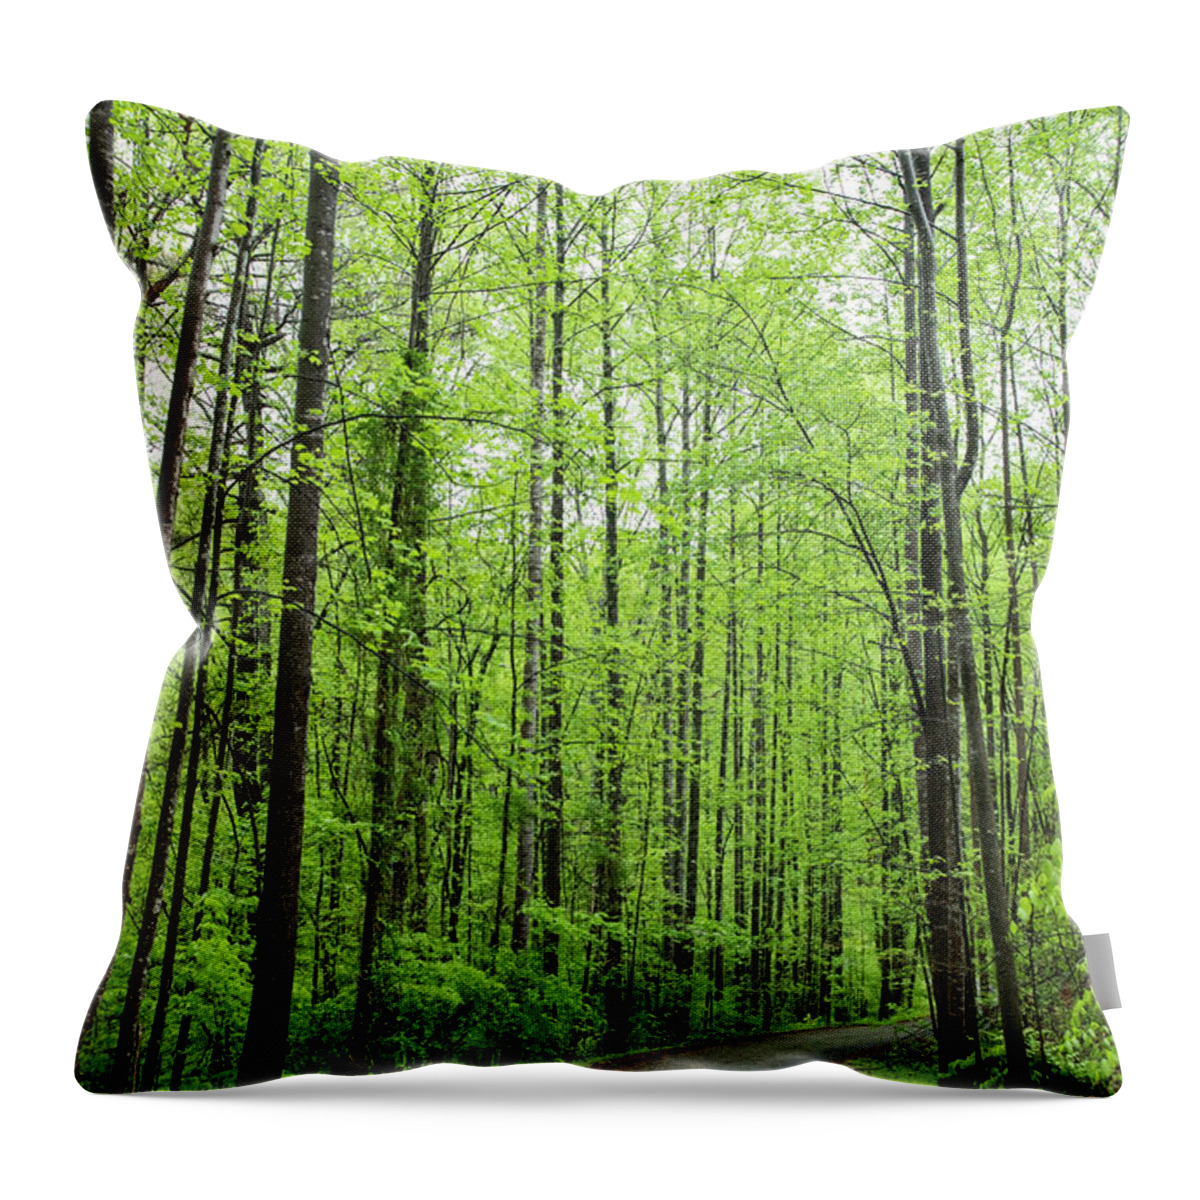 Curving Throw Pillow featuring the photograph Tree-lined lane in early spring by Charles Floyd